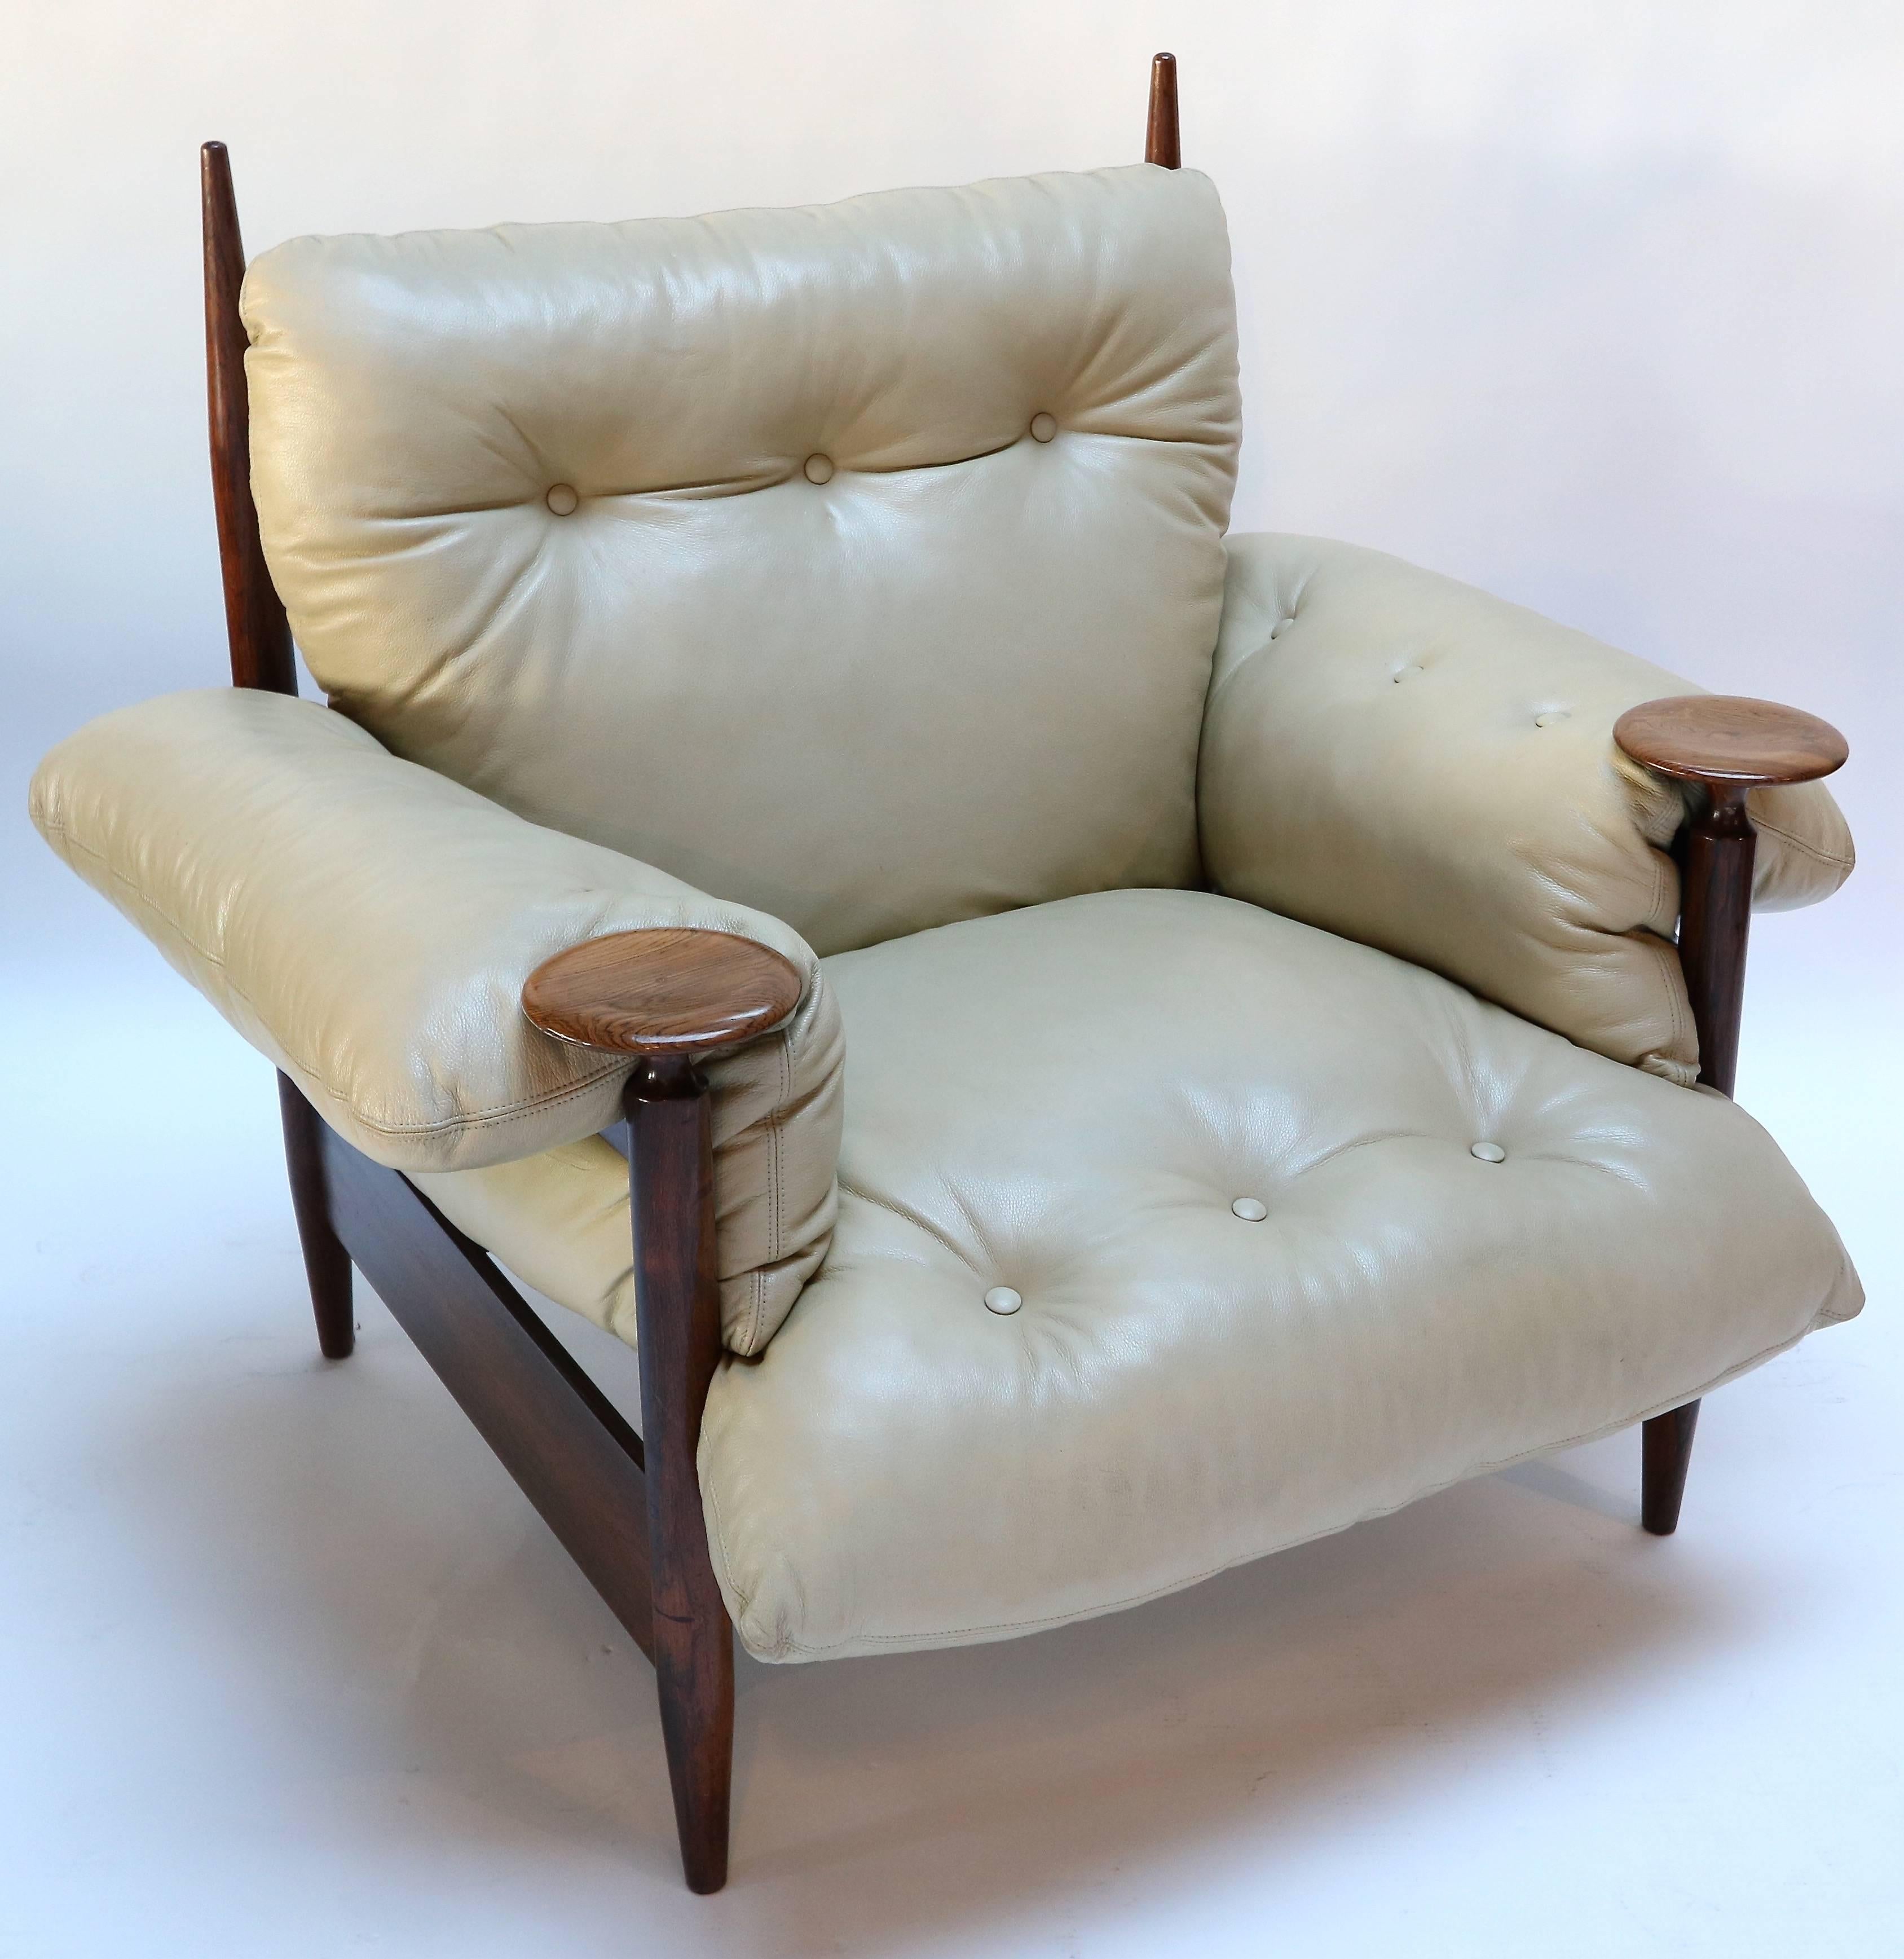 Pair of 1960s Brazilian jacaranda armchairs by M. L. Magalhães with beige leather cushions.